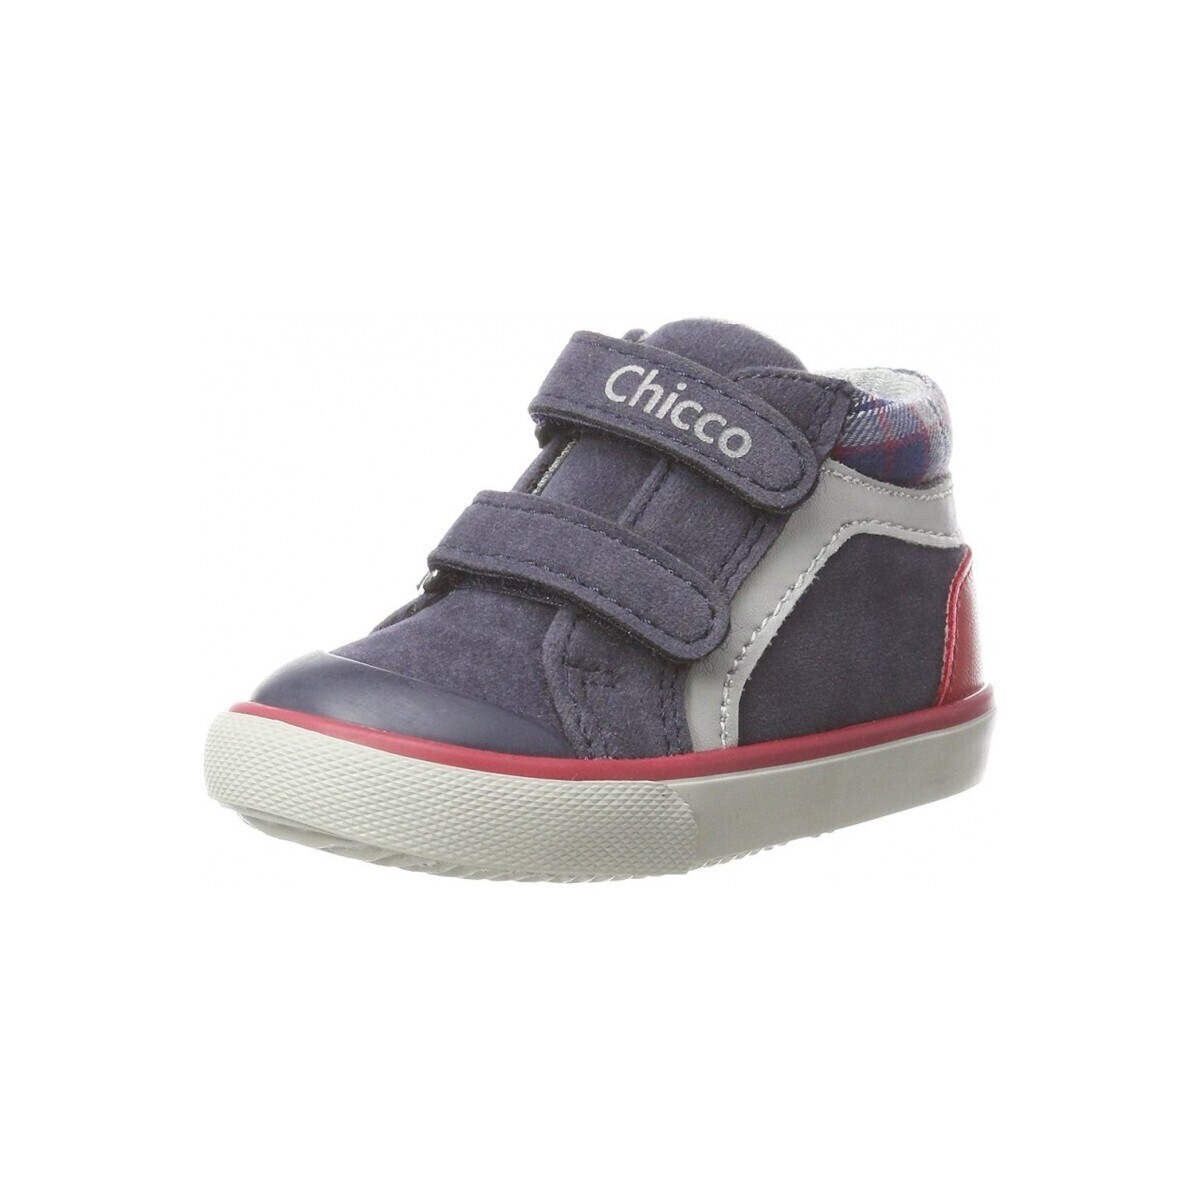 Sneakers Chicco 22513-15